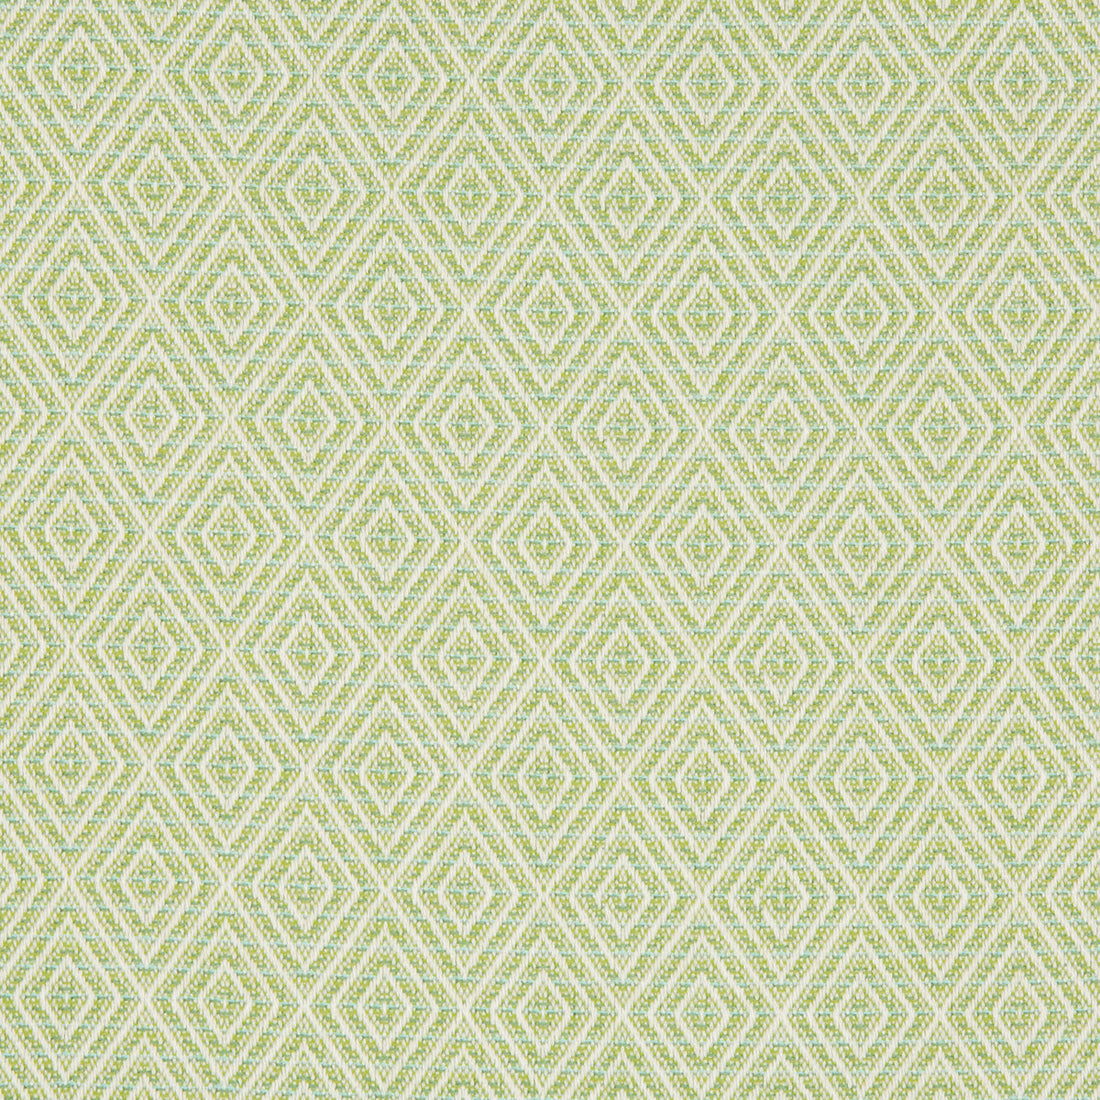 Grace Bay Woven fabric in kiwi color - pattern 8017152.3.0 - by Brunschwig &amp; Fils in the En Vacances collection